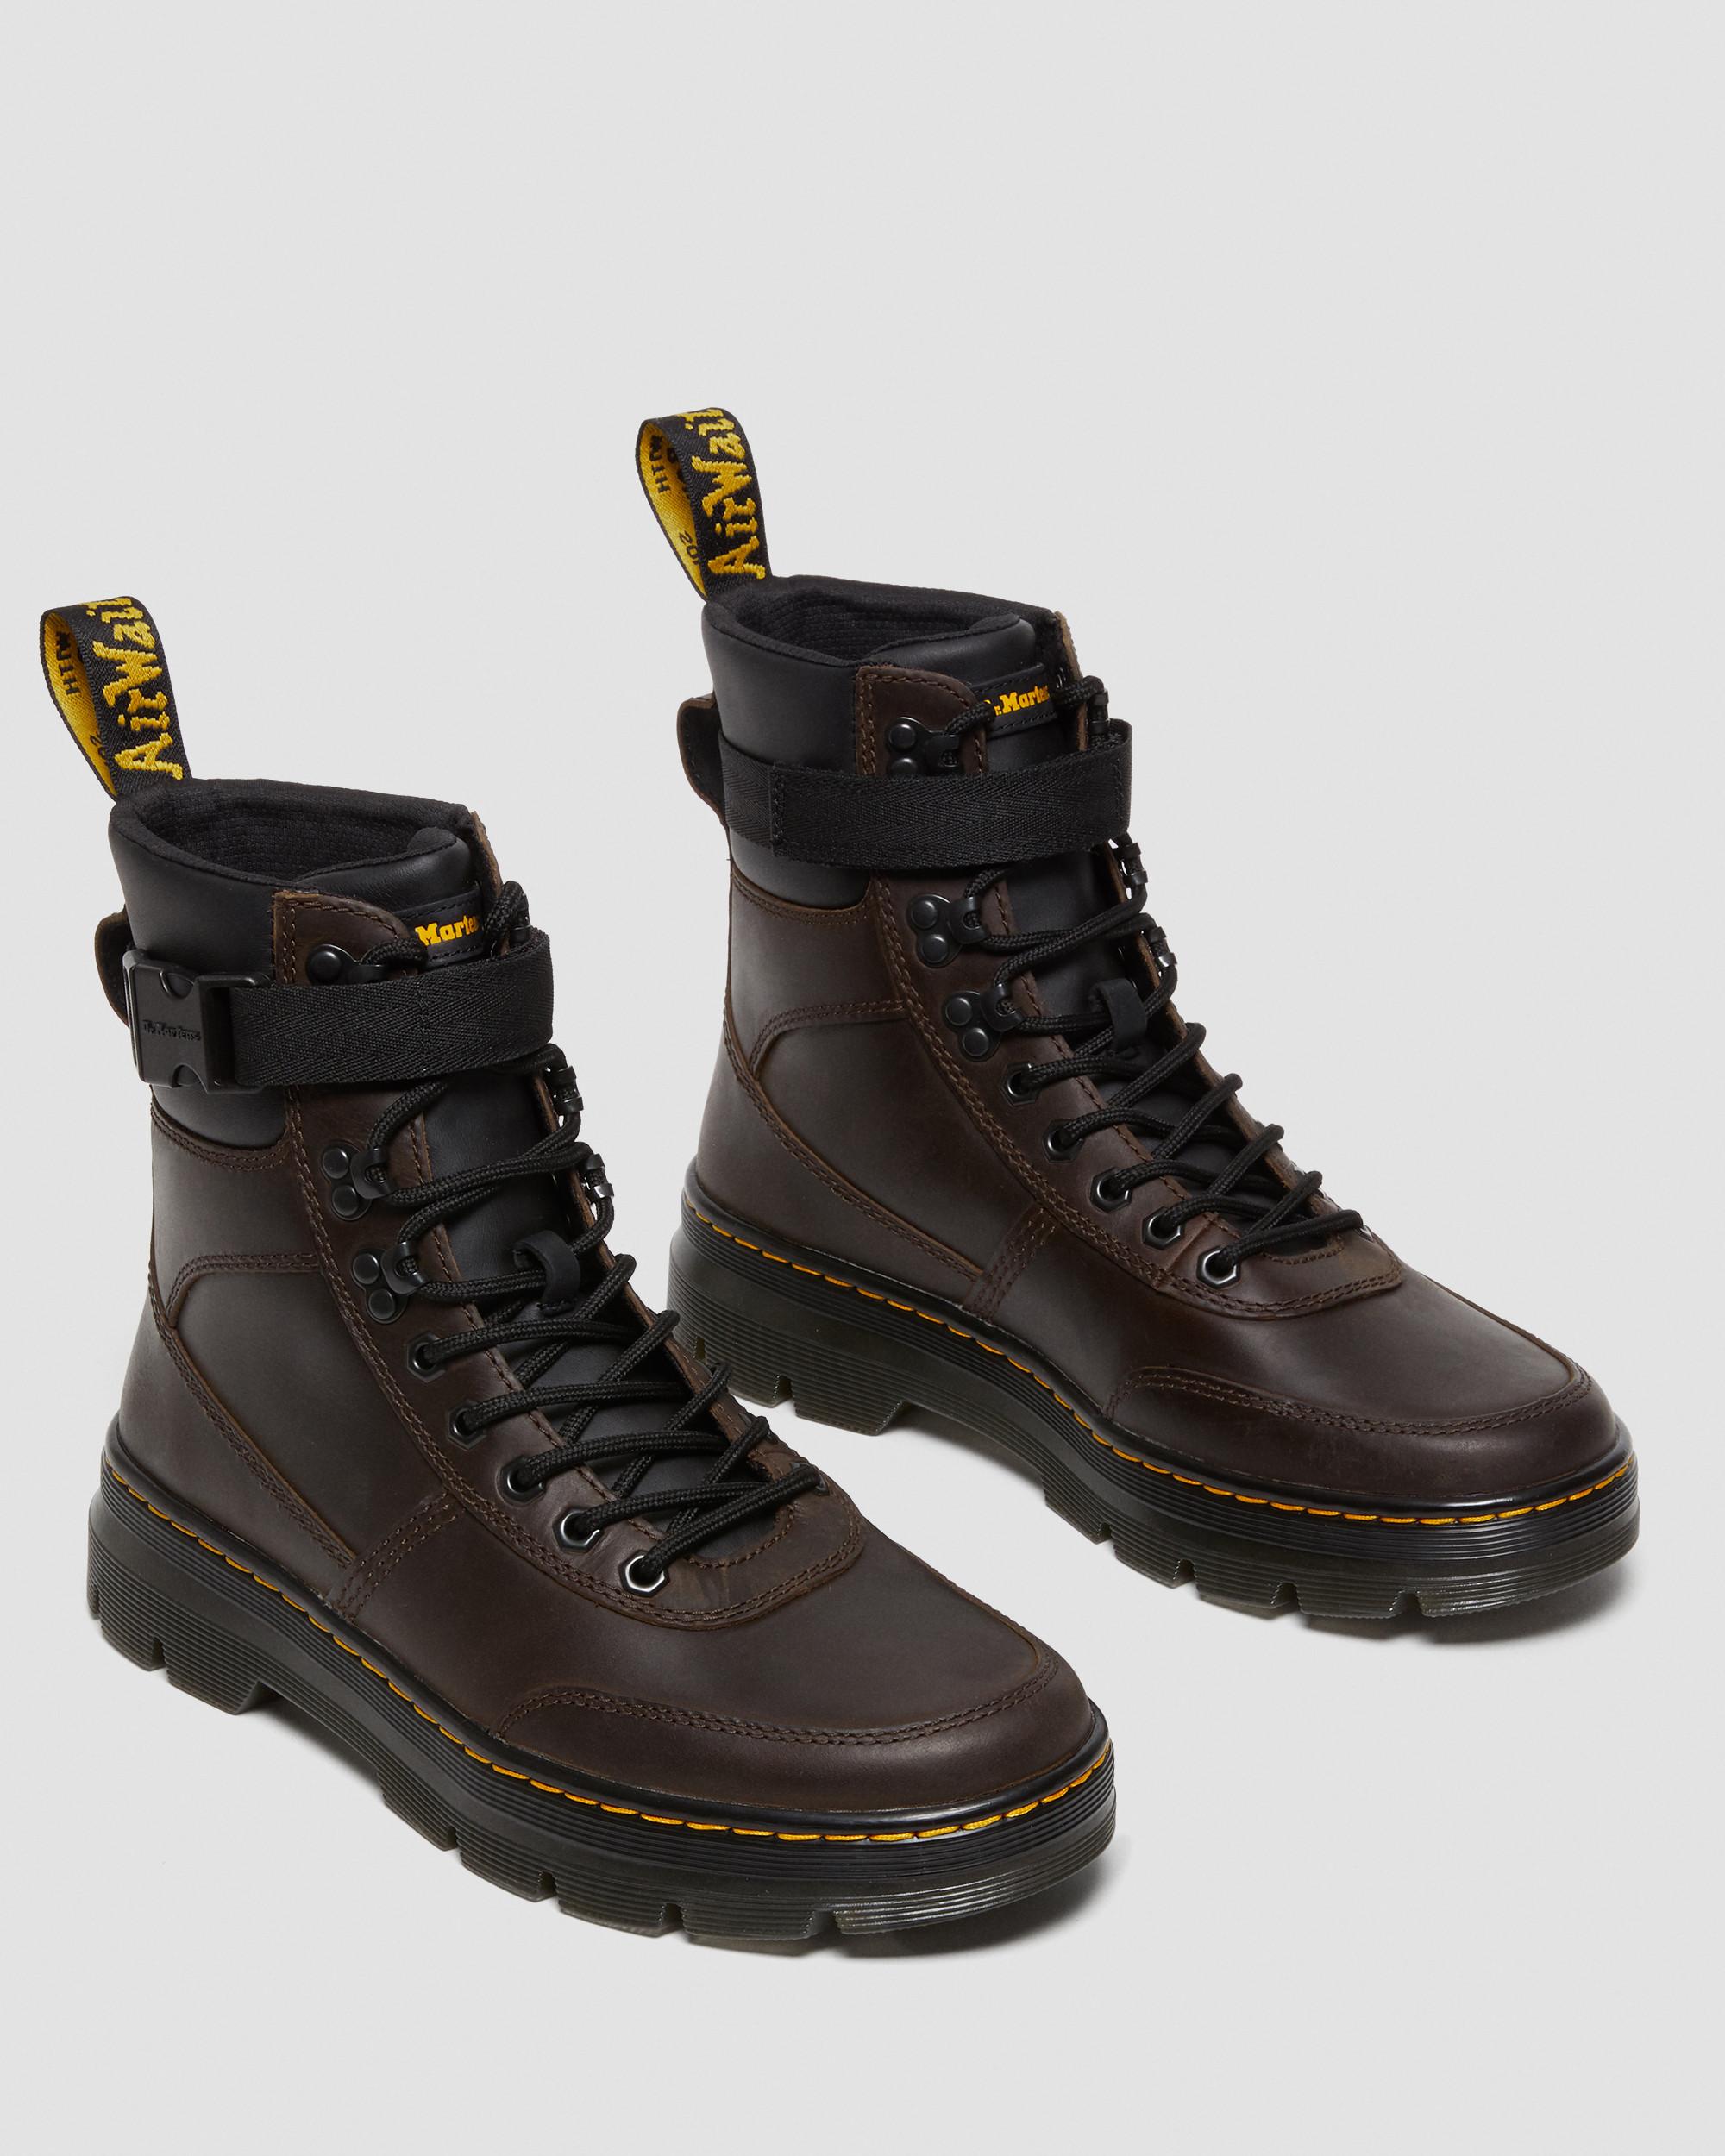 Combs Tech Crazy Horse Leather Casual Boots, Dark Brown | Dr. Martens